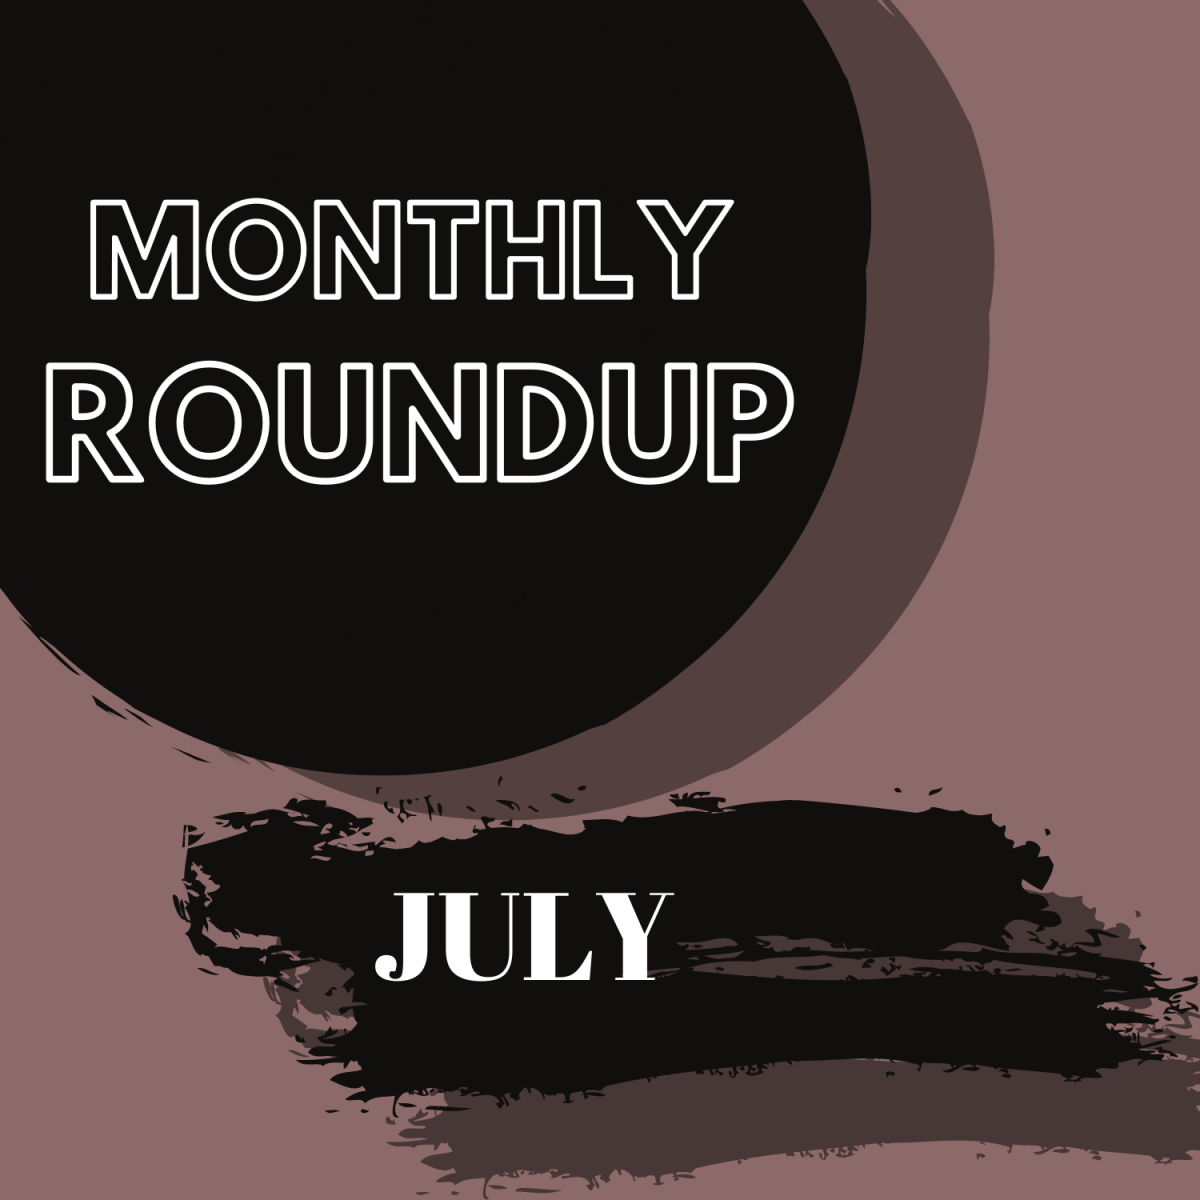 Why July To Me? July Roundup – The Greater Good